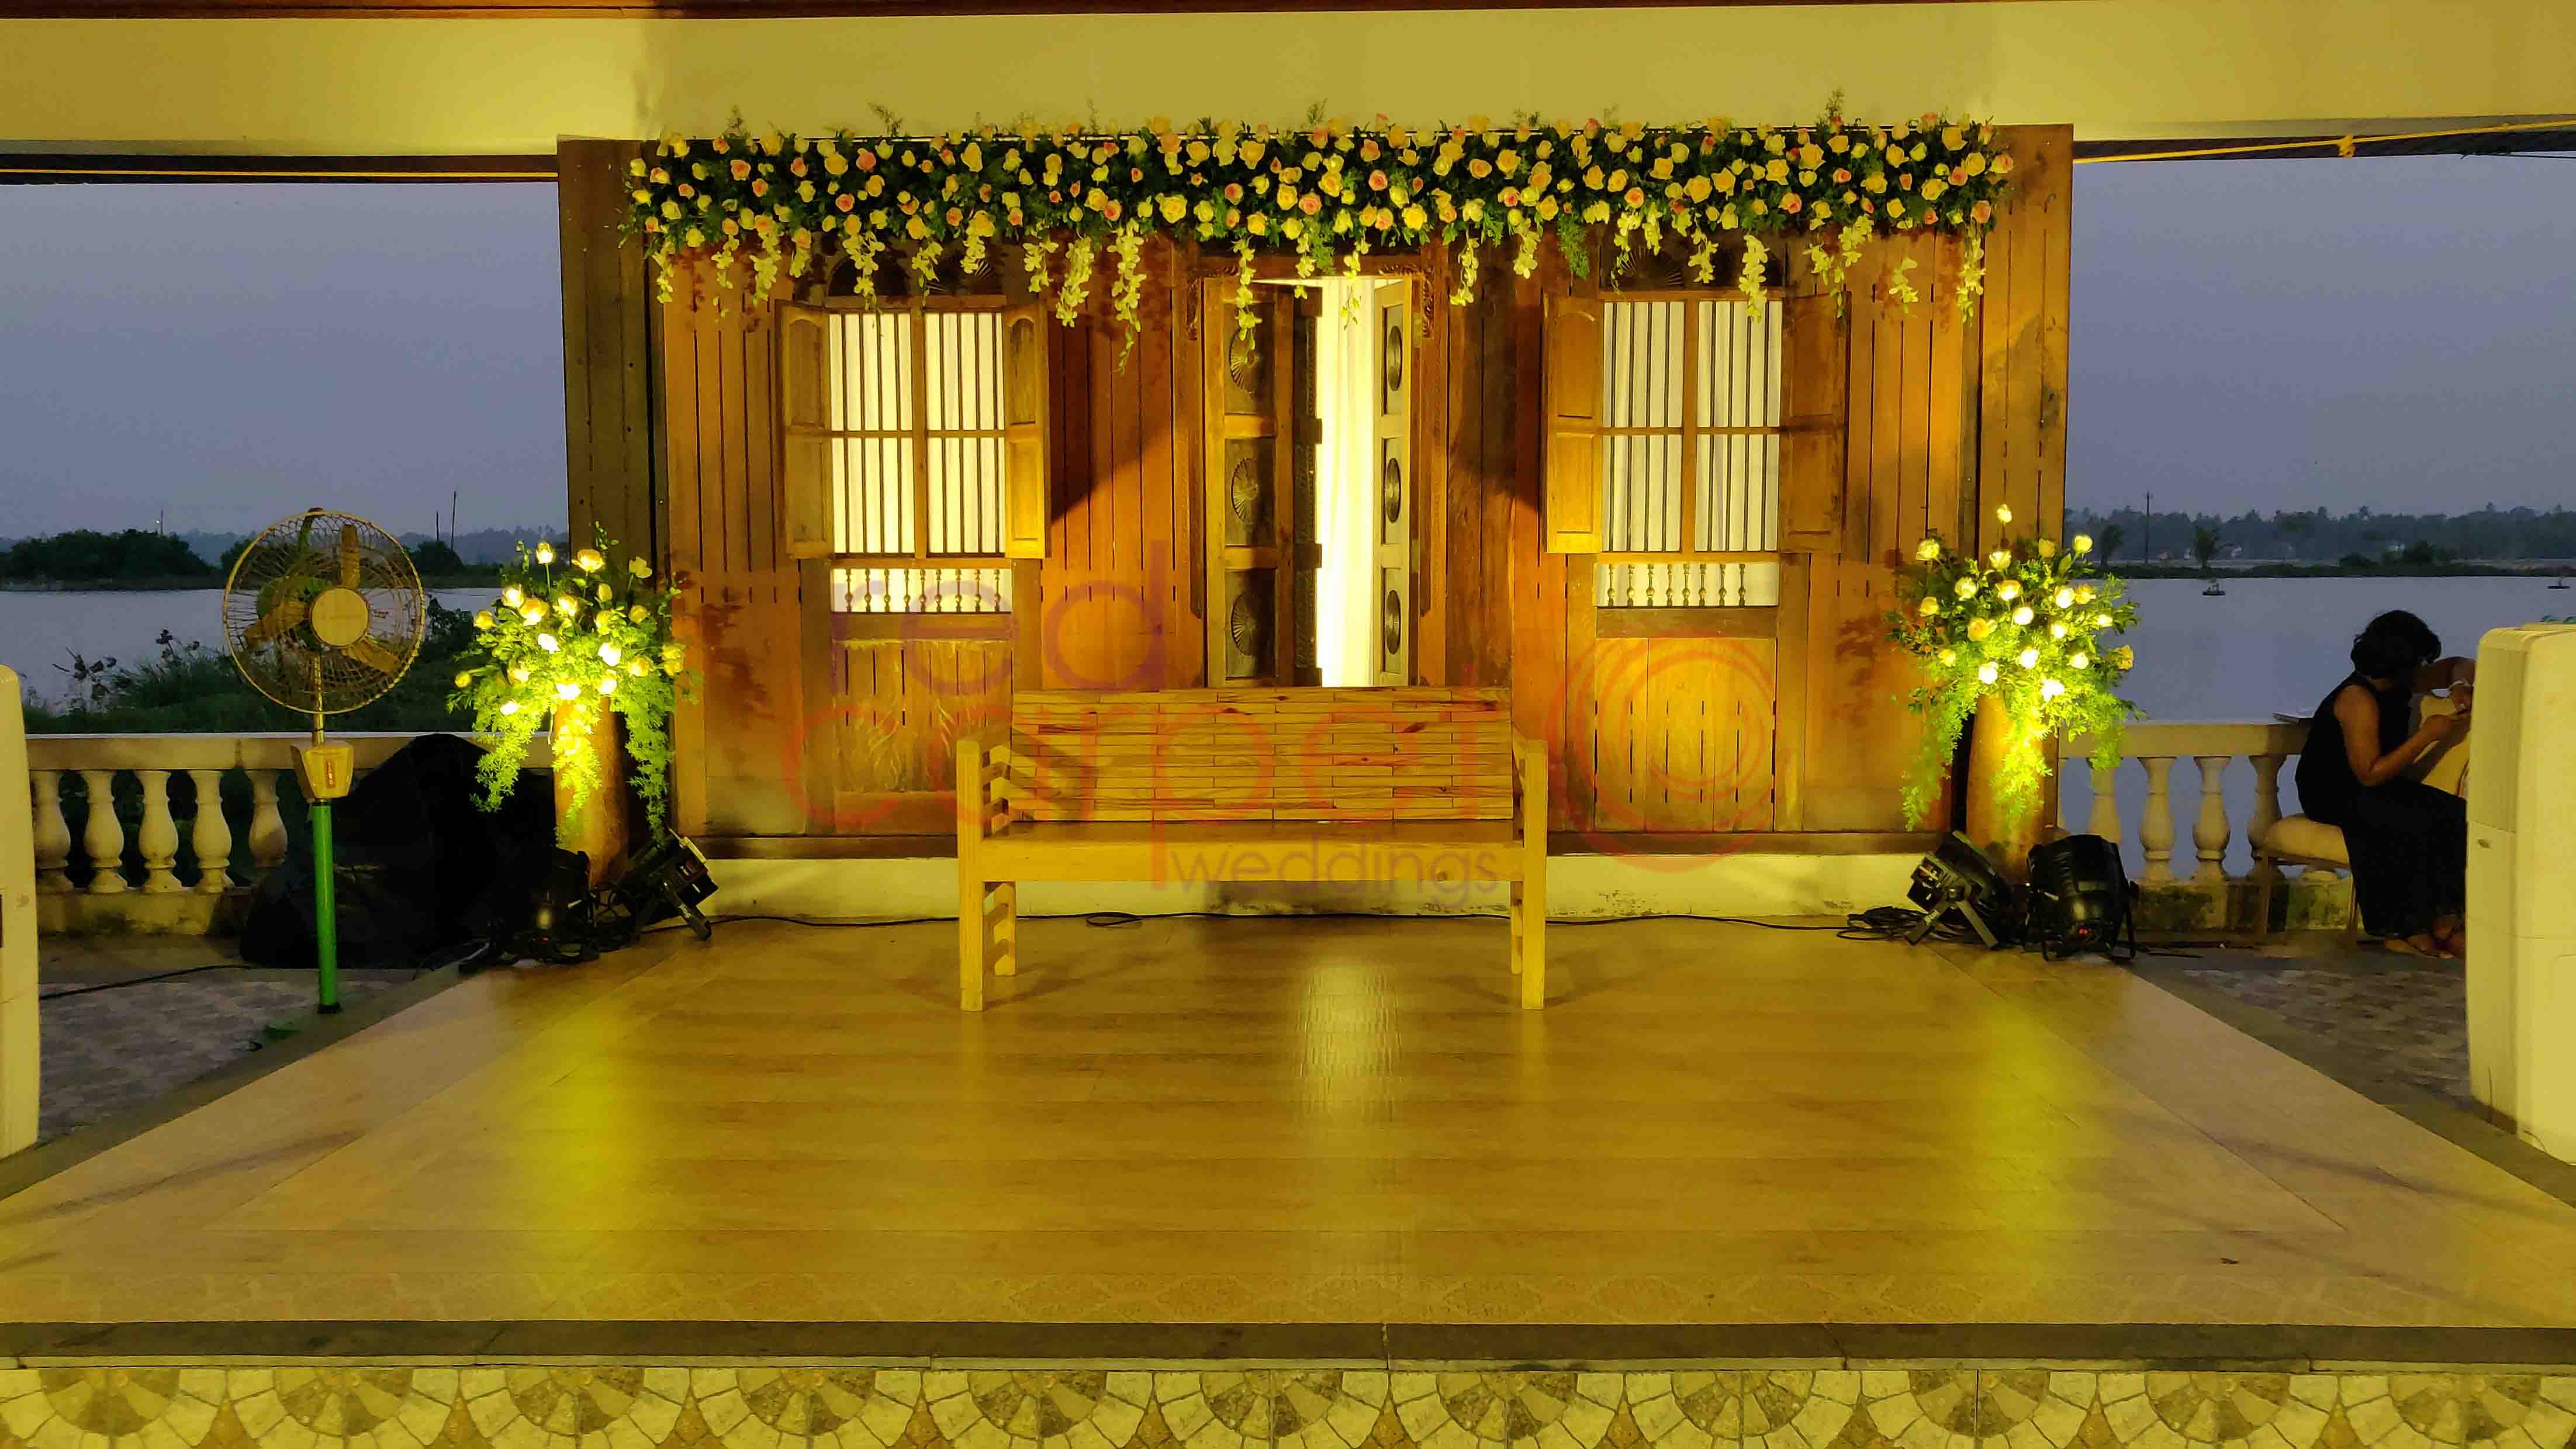 Indriya Sands Resort facilities: Nikah reception stage at the pool side